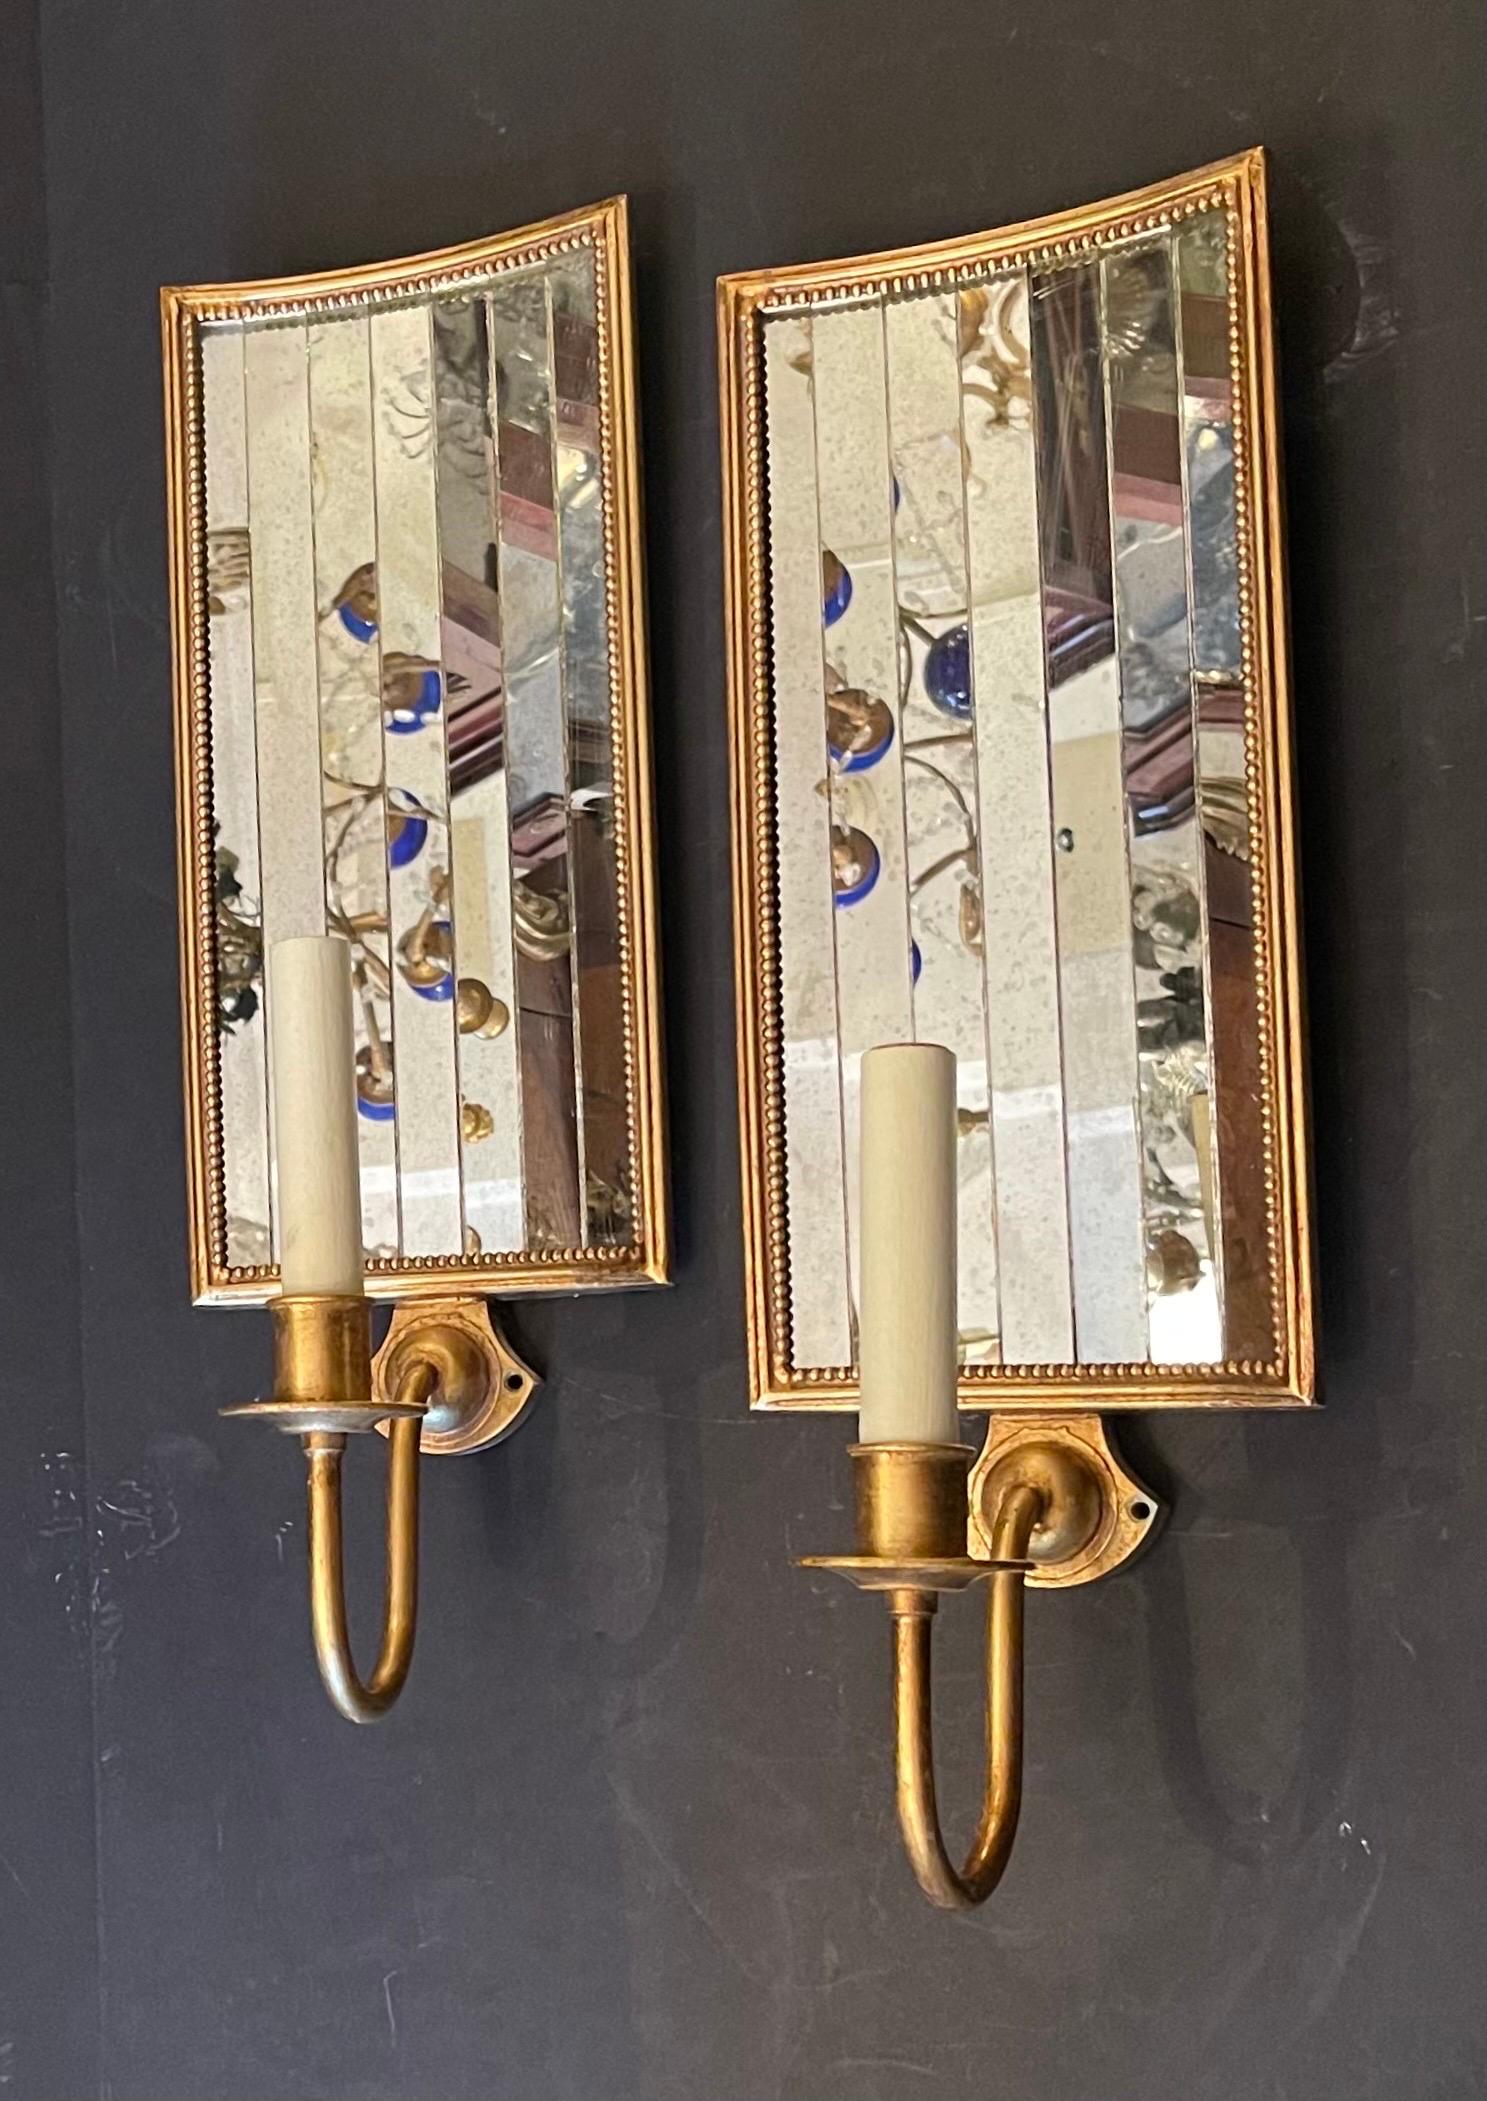 A Wonderful Pair Of Large Vaughan Designs Tole Gold Gilt With Inset Mirror Strips Panel Wall Sconces 
Item# WA0068 